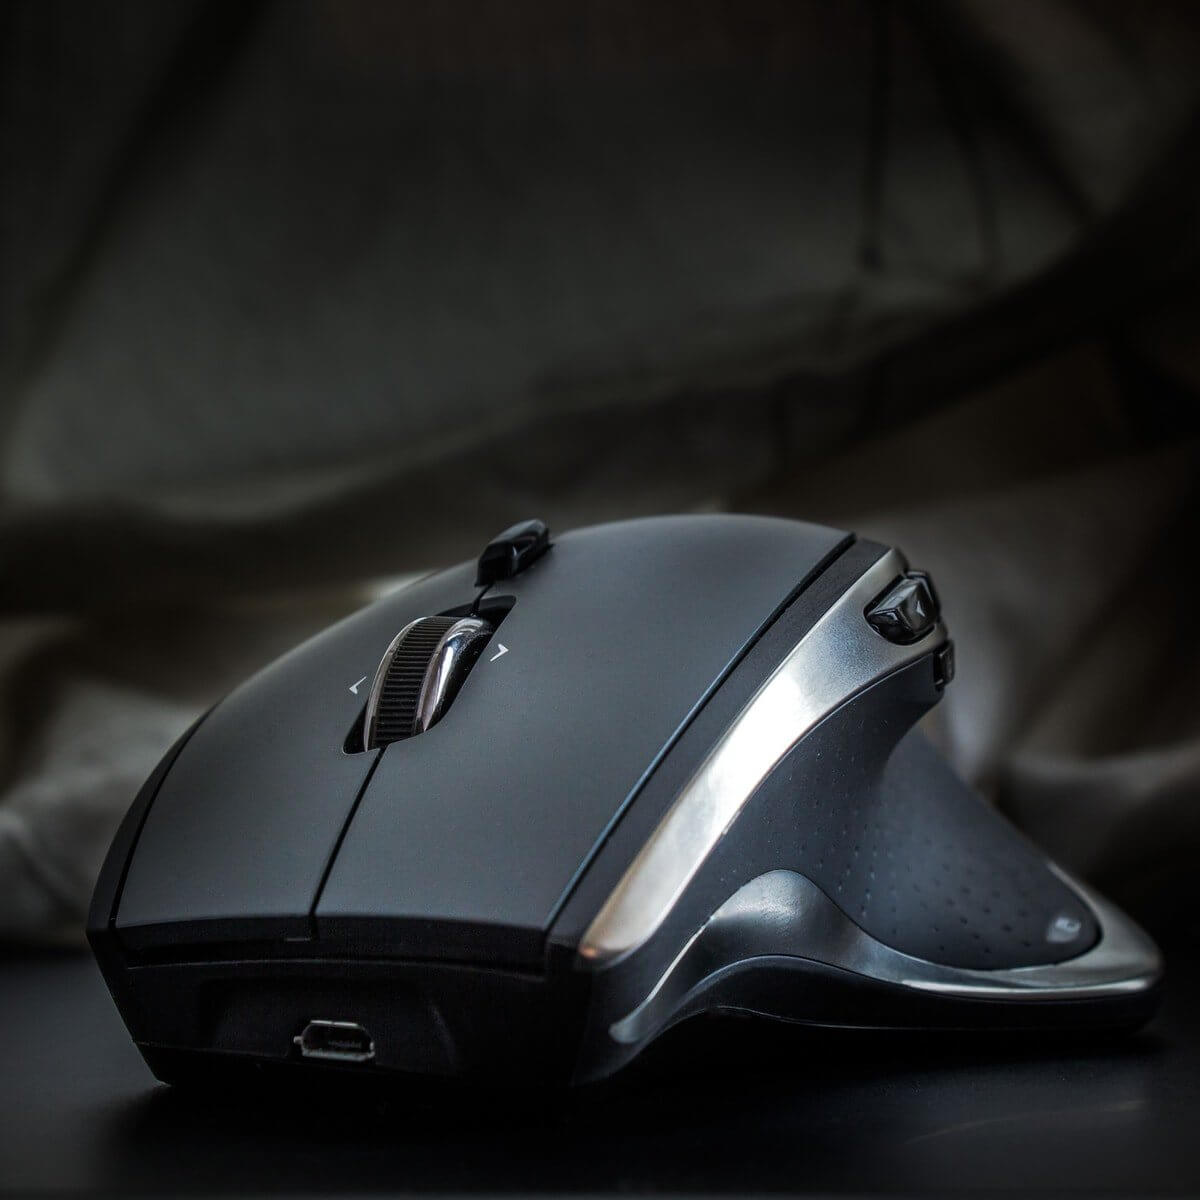 3D Mouse for CAD Applications